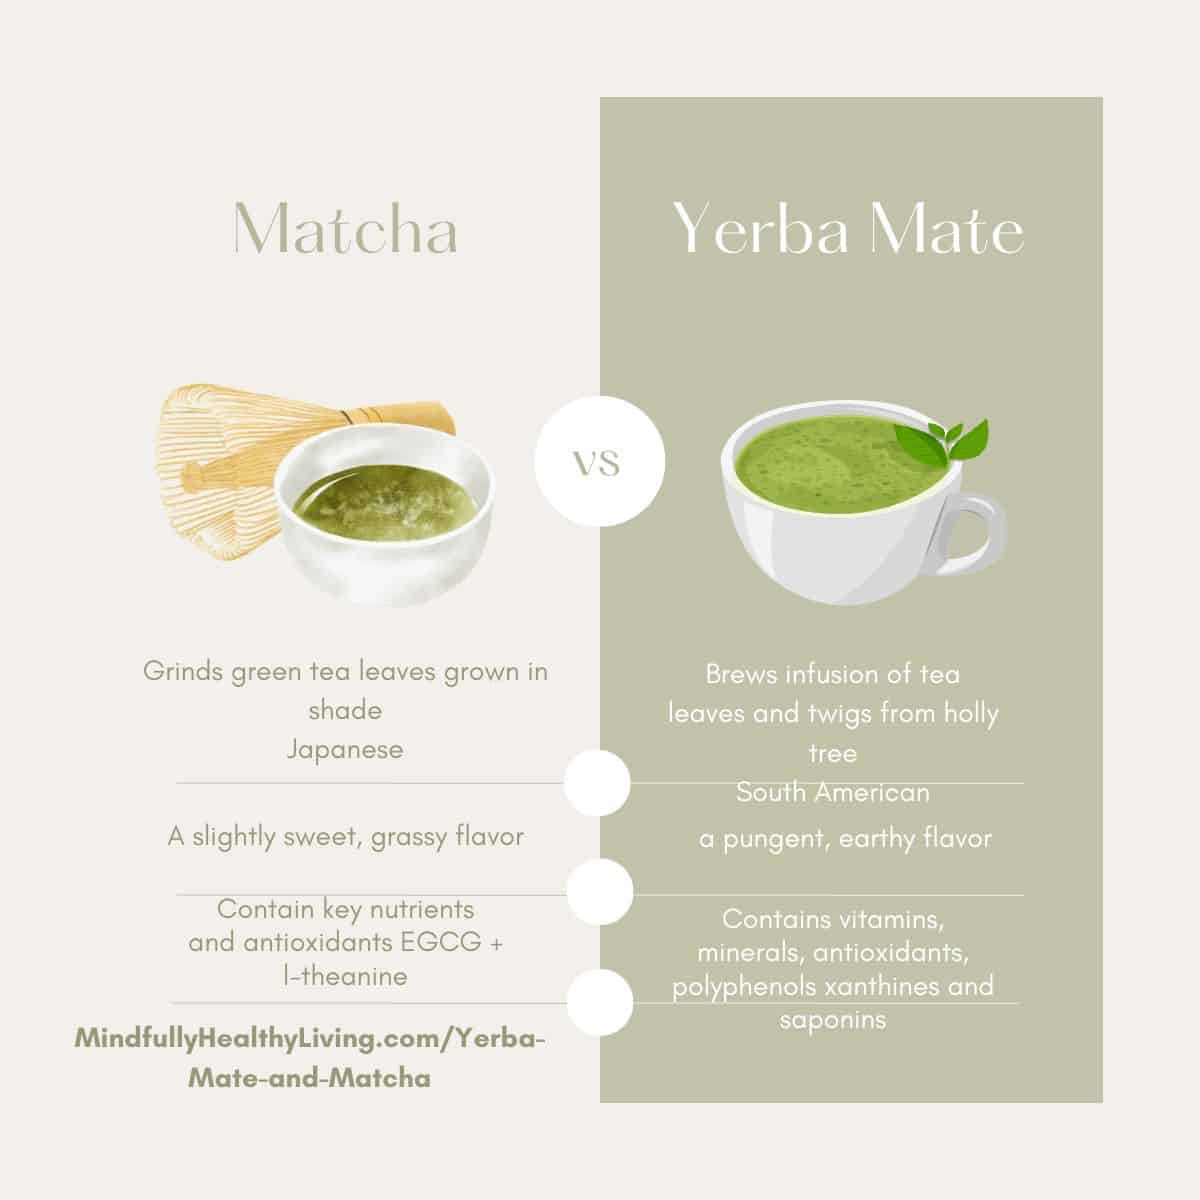 an infographic with two columns in tan and cream colors alternative text and background color cut in half. left side says matcha with a picture of a white matcha tea bowl with green matcha in it, and a matcha whisk next to it. Under it says "grinds tea leaves grown in shade" under that reads "japanese" a line under that and below reads "a slightly sweet, grassy flavor" with a line under it then below says "contains key nutrients and antioxidants EGCS + l-theanine." On the right side says "Yerba Mate" with a picture of a white cup with green colored tea in it and a green leaf in it. below reads "brews infusion of tea leaves and twigs from holly tree" with a line below it and under that reads "south American, a pungent, earthy flavor" a line below that and beneath it reads contains vitamins, minerals, antioxidants, polyphenols xanthines and saponins""